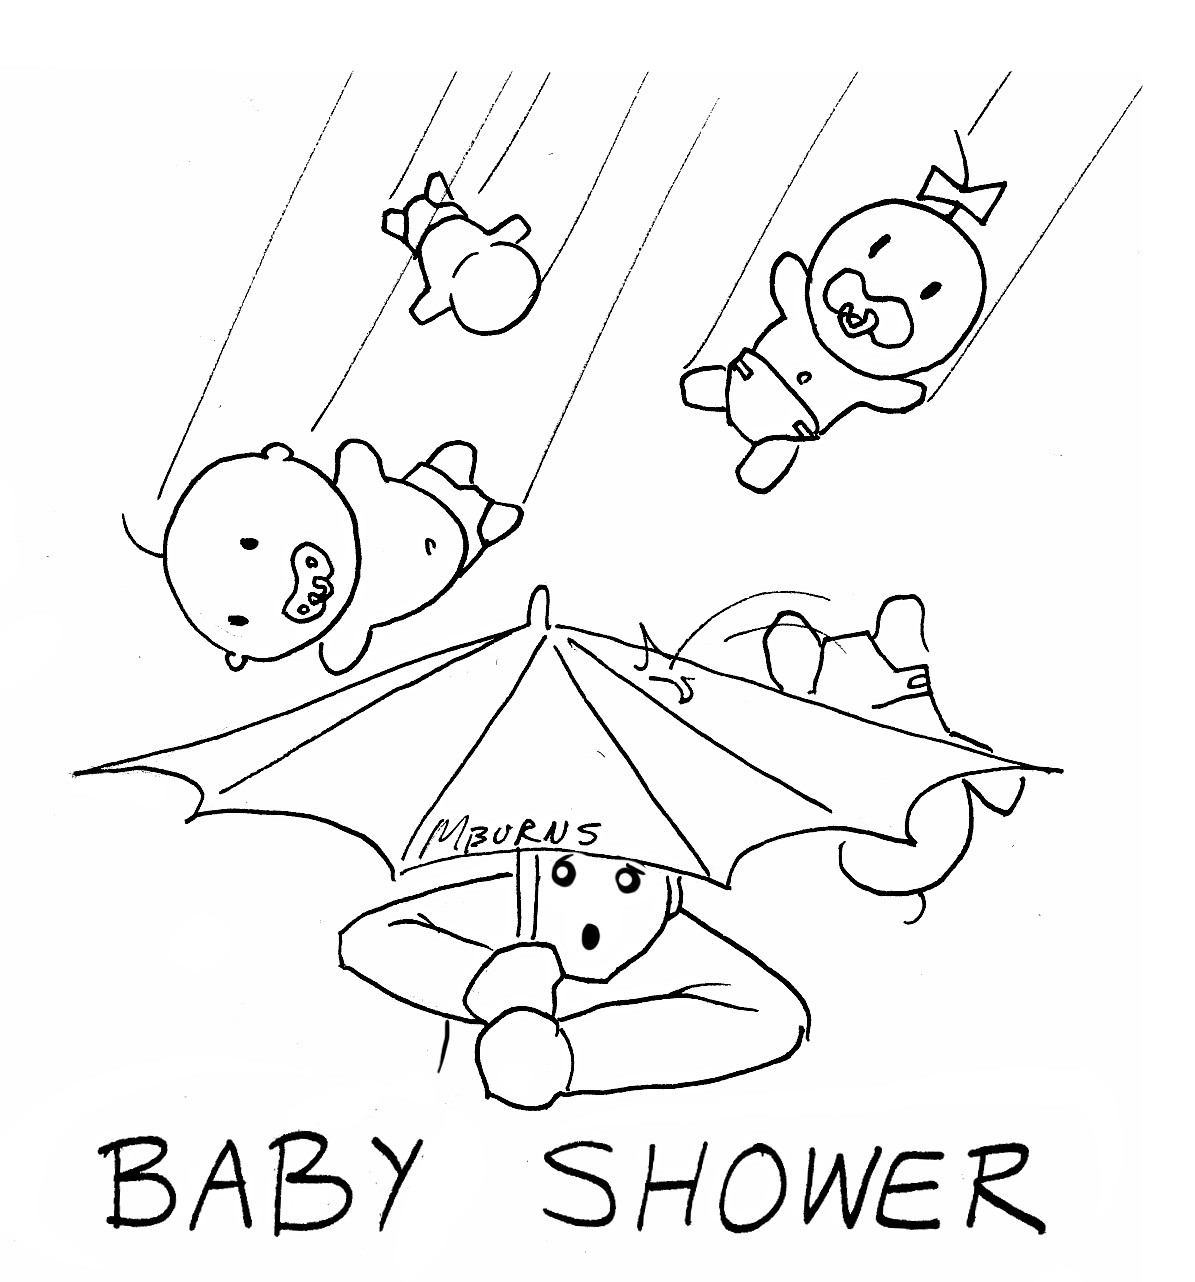 Baby Shower Coloring Book
 " ic Strip" by Mike Burns Baby Shower Teleport